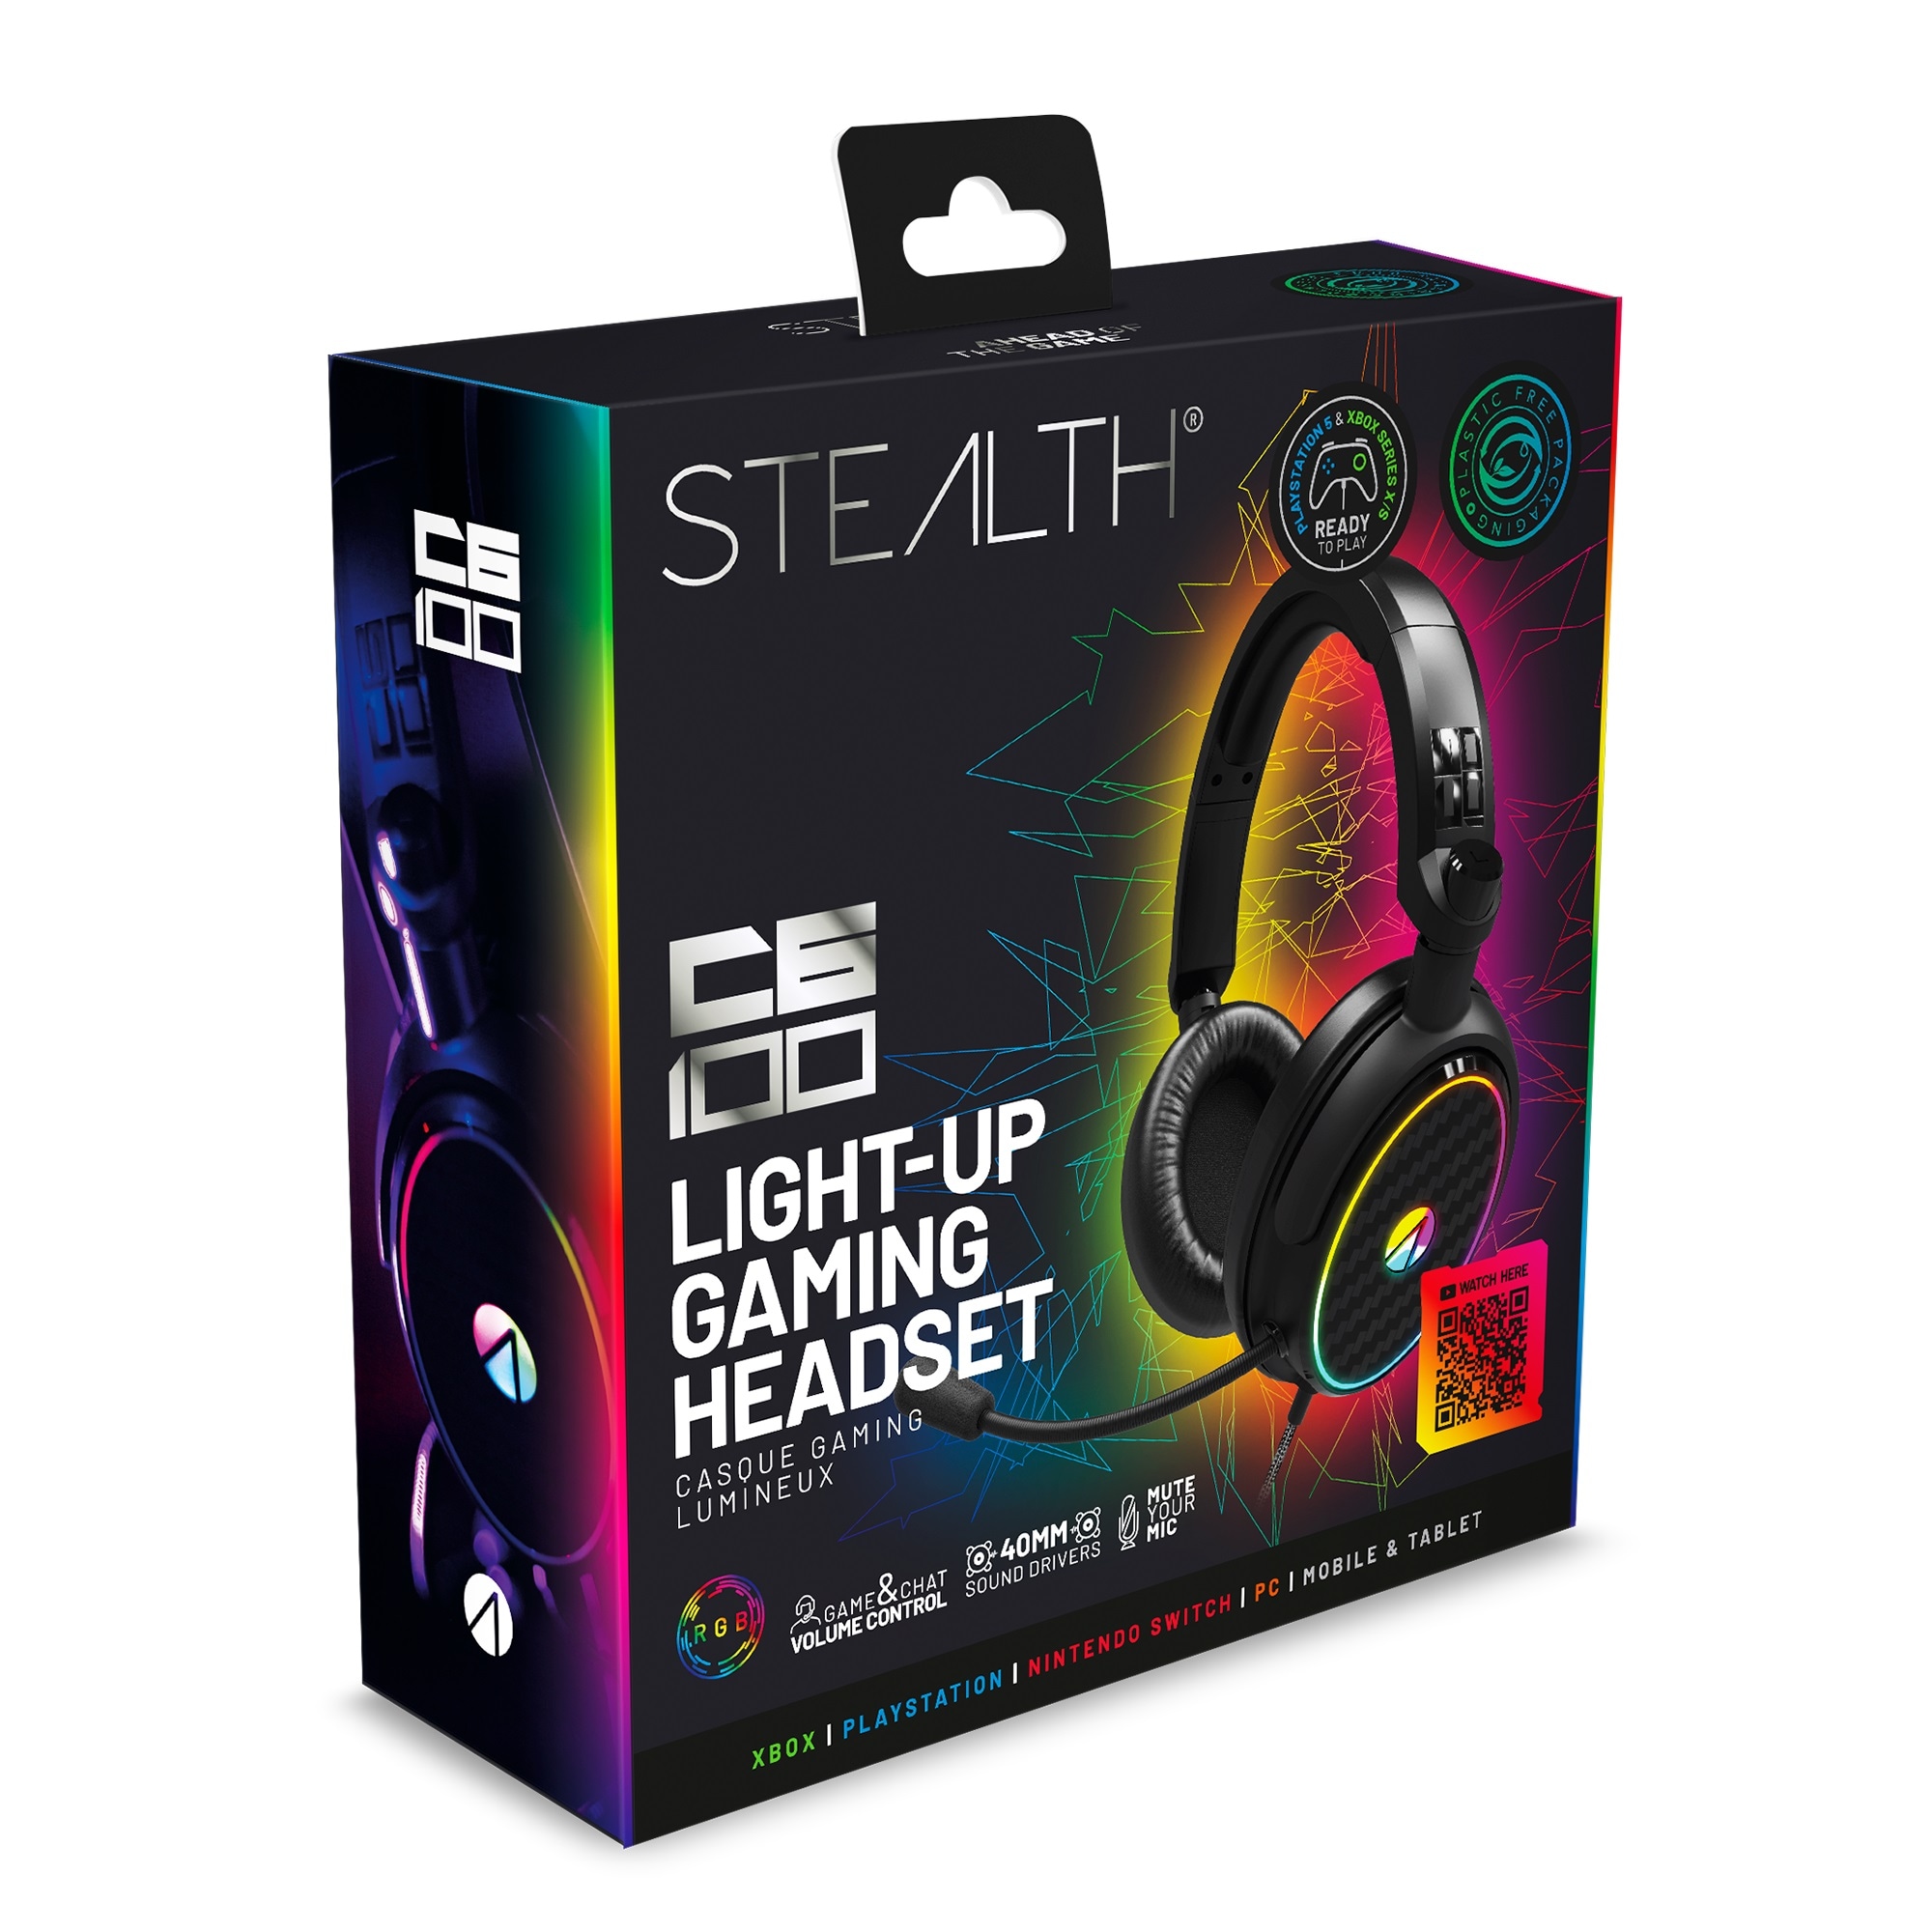 LED UNIVERSAL kaufen C6-100 online Beleuchtung«, mit Headset Gaming Verpackung | Plastikfreie Gaming-Headset »Stereo Stealth